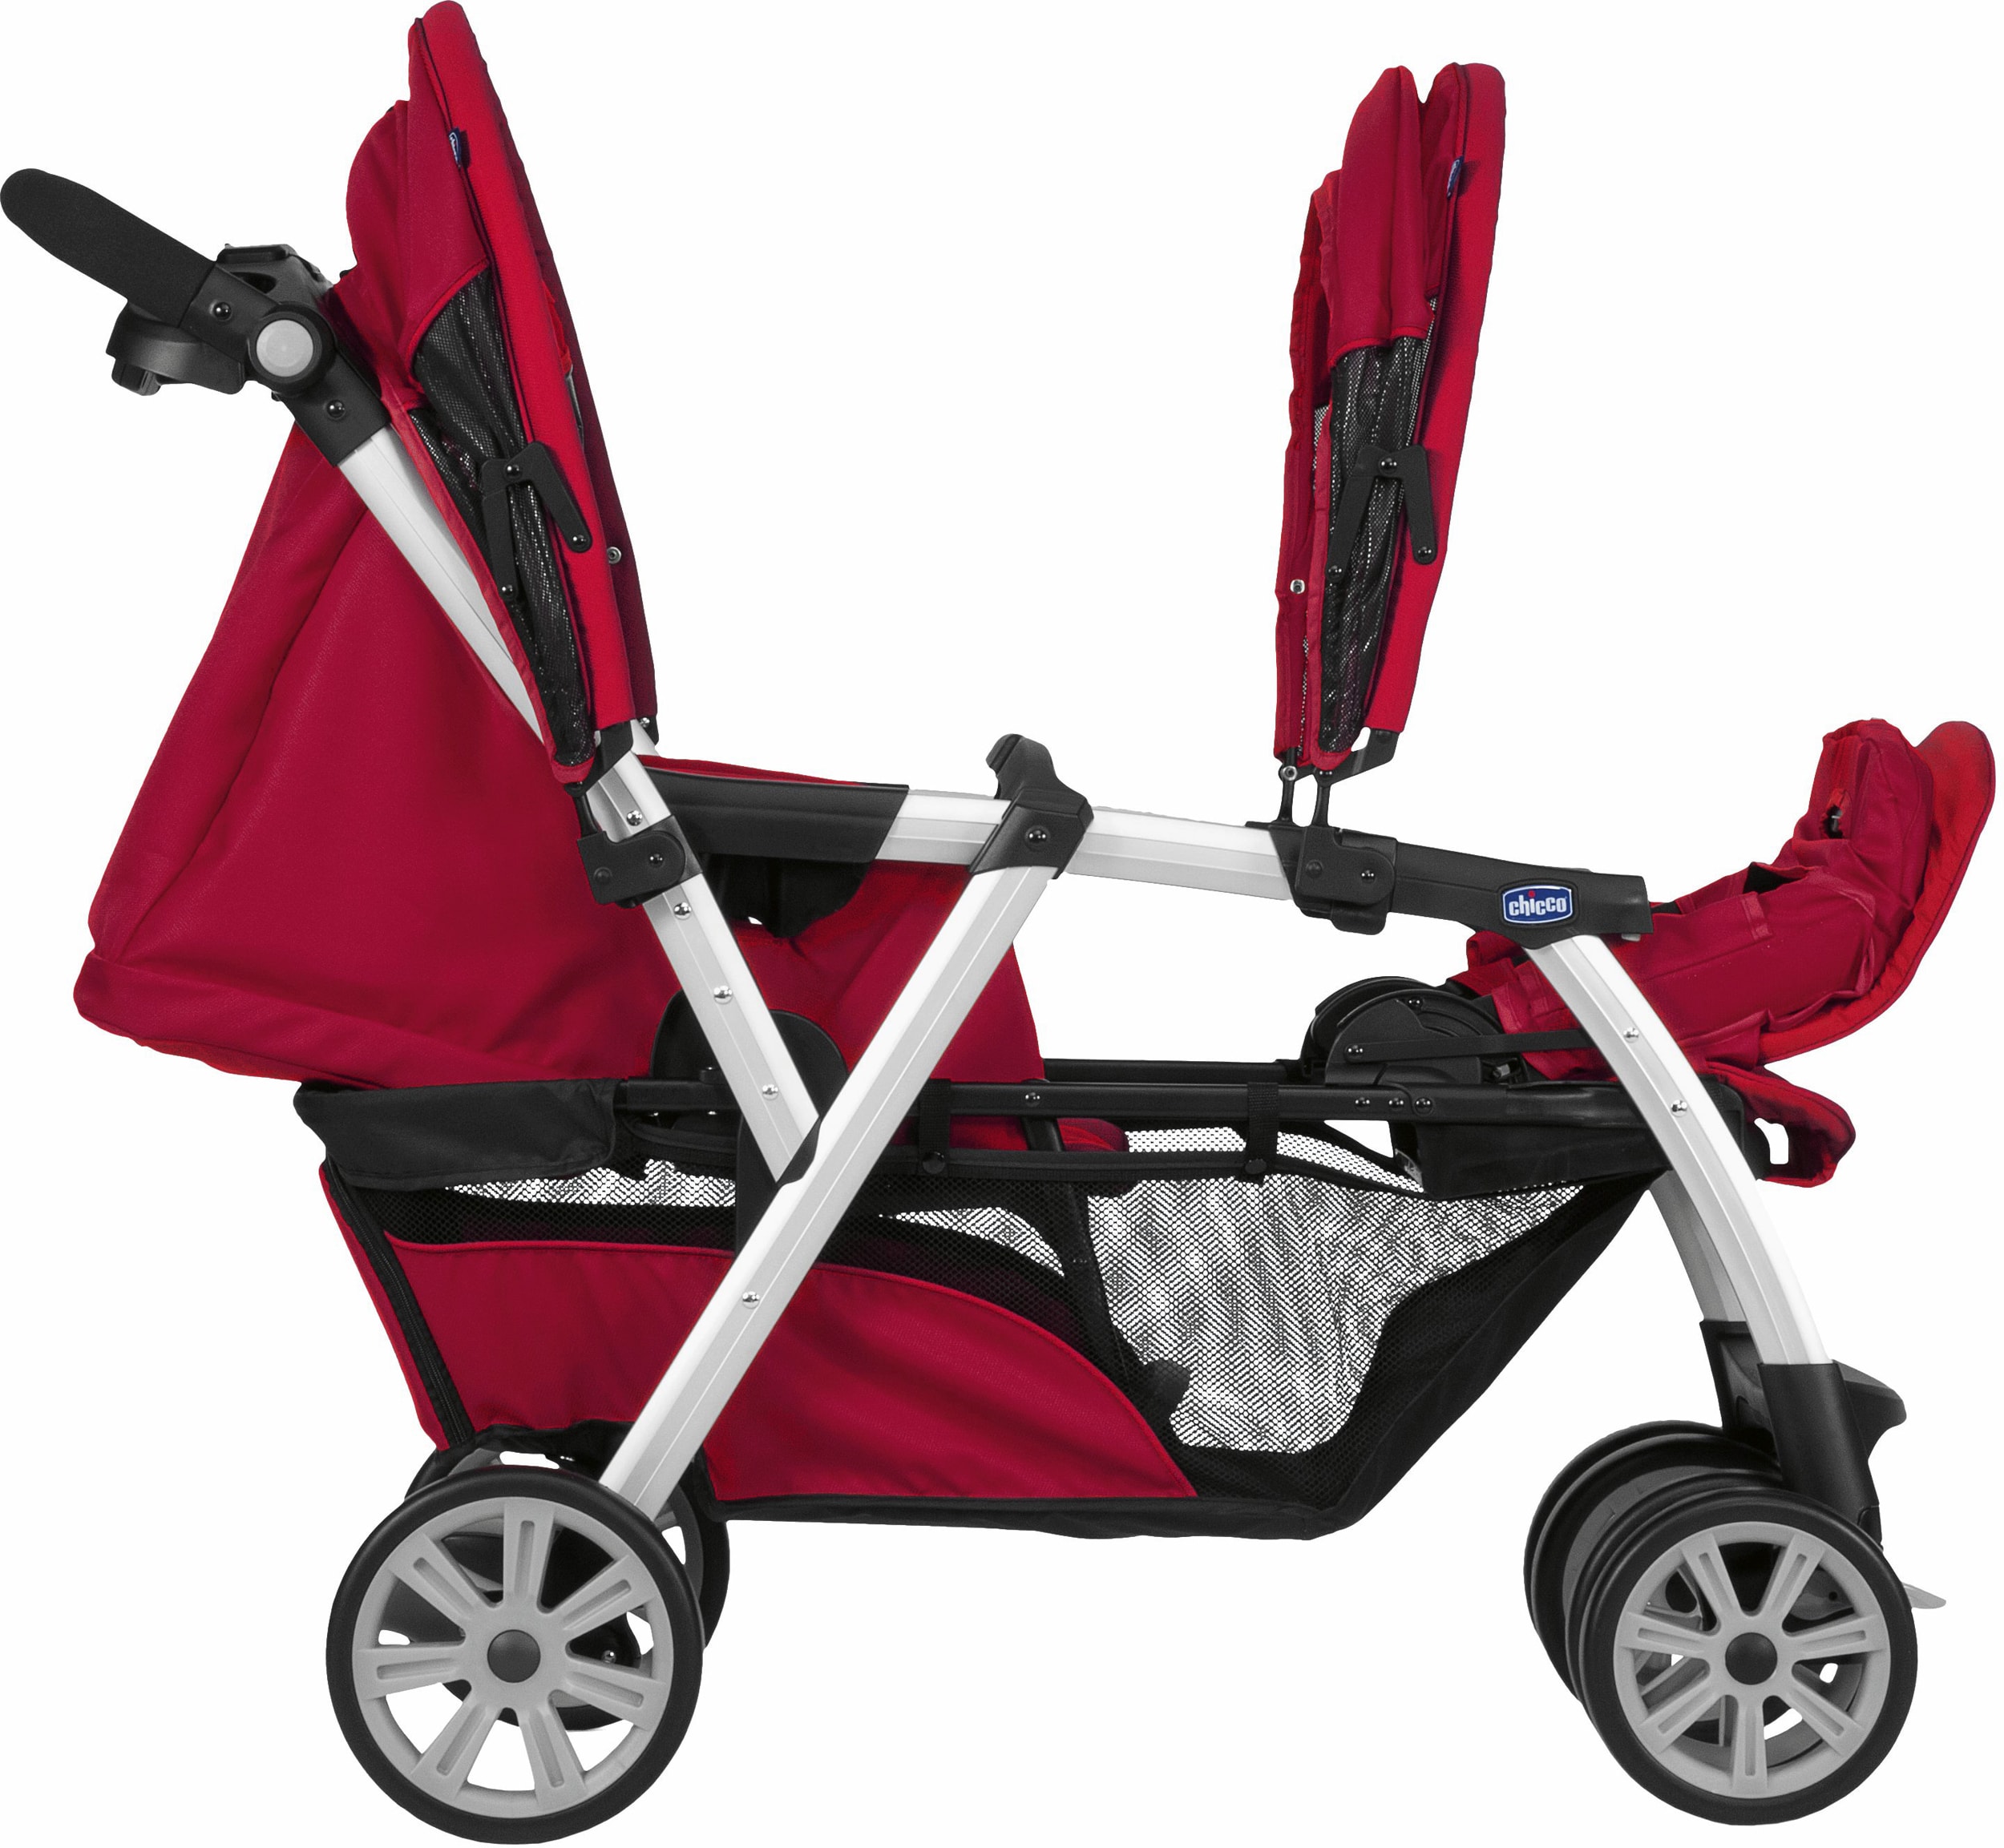 Poussette multiple CHICCO Together red Pas Cher 